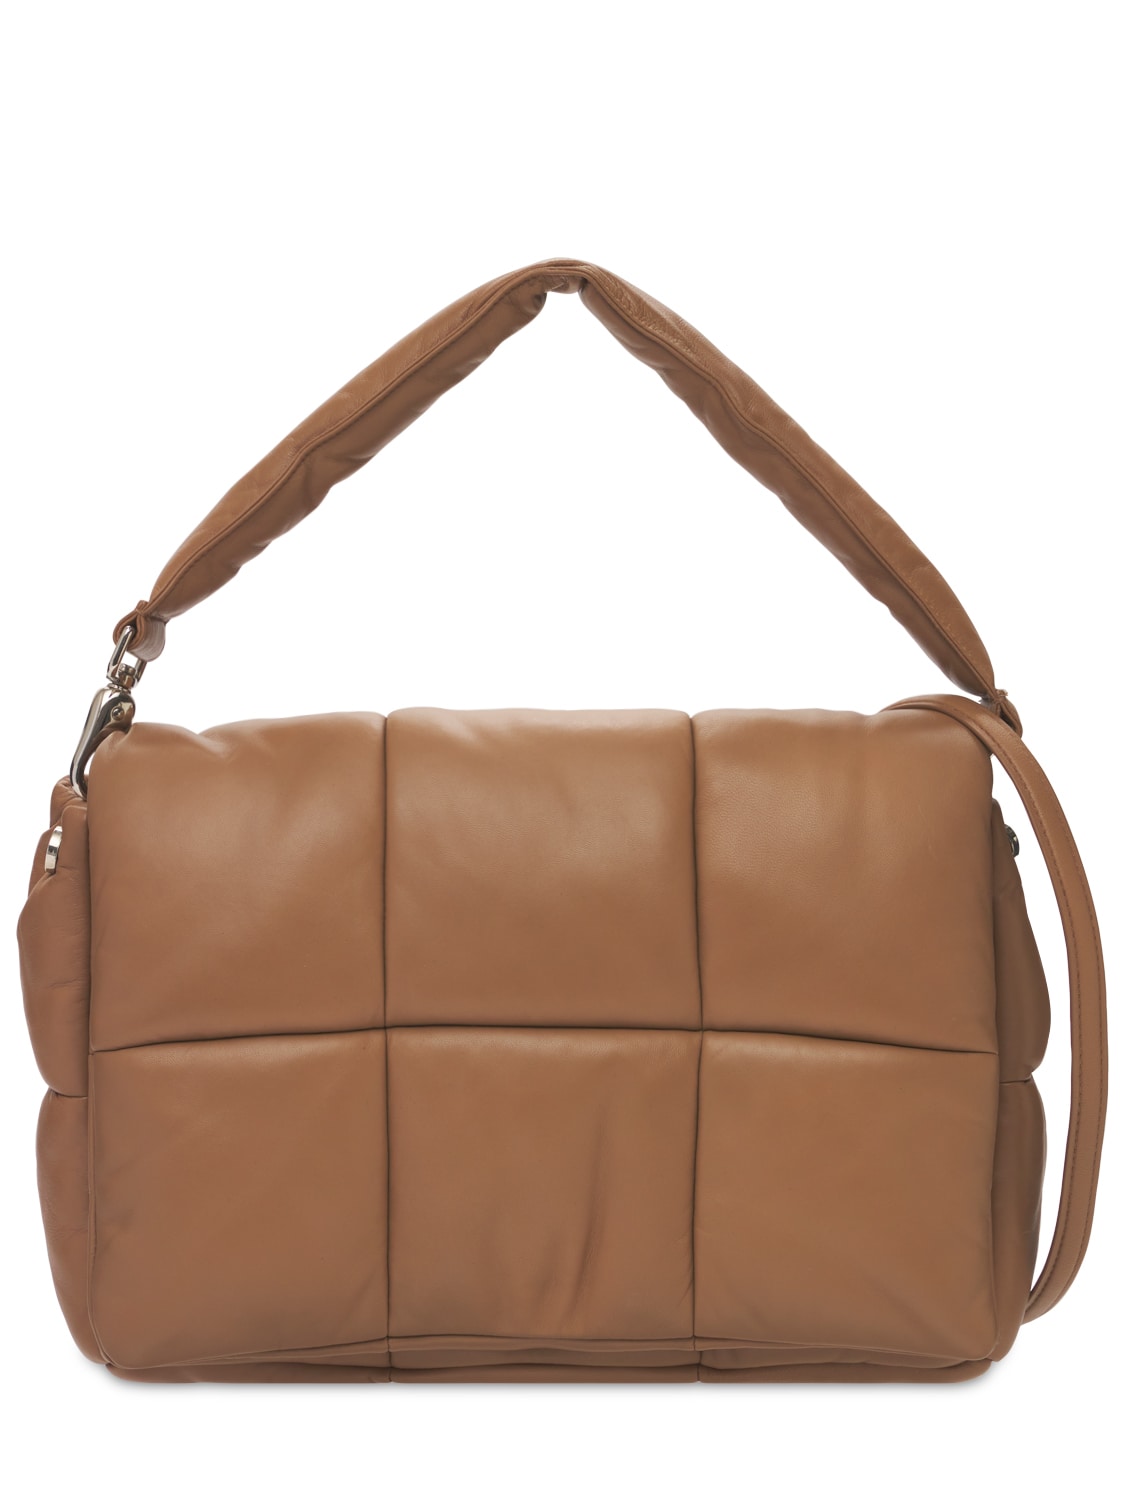 Stand Studio Wanda Quilted Leather Bag In Sand